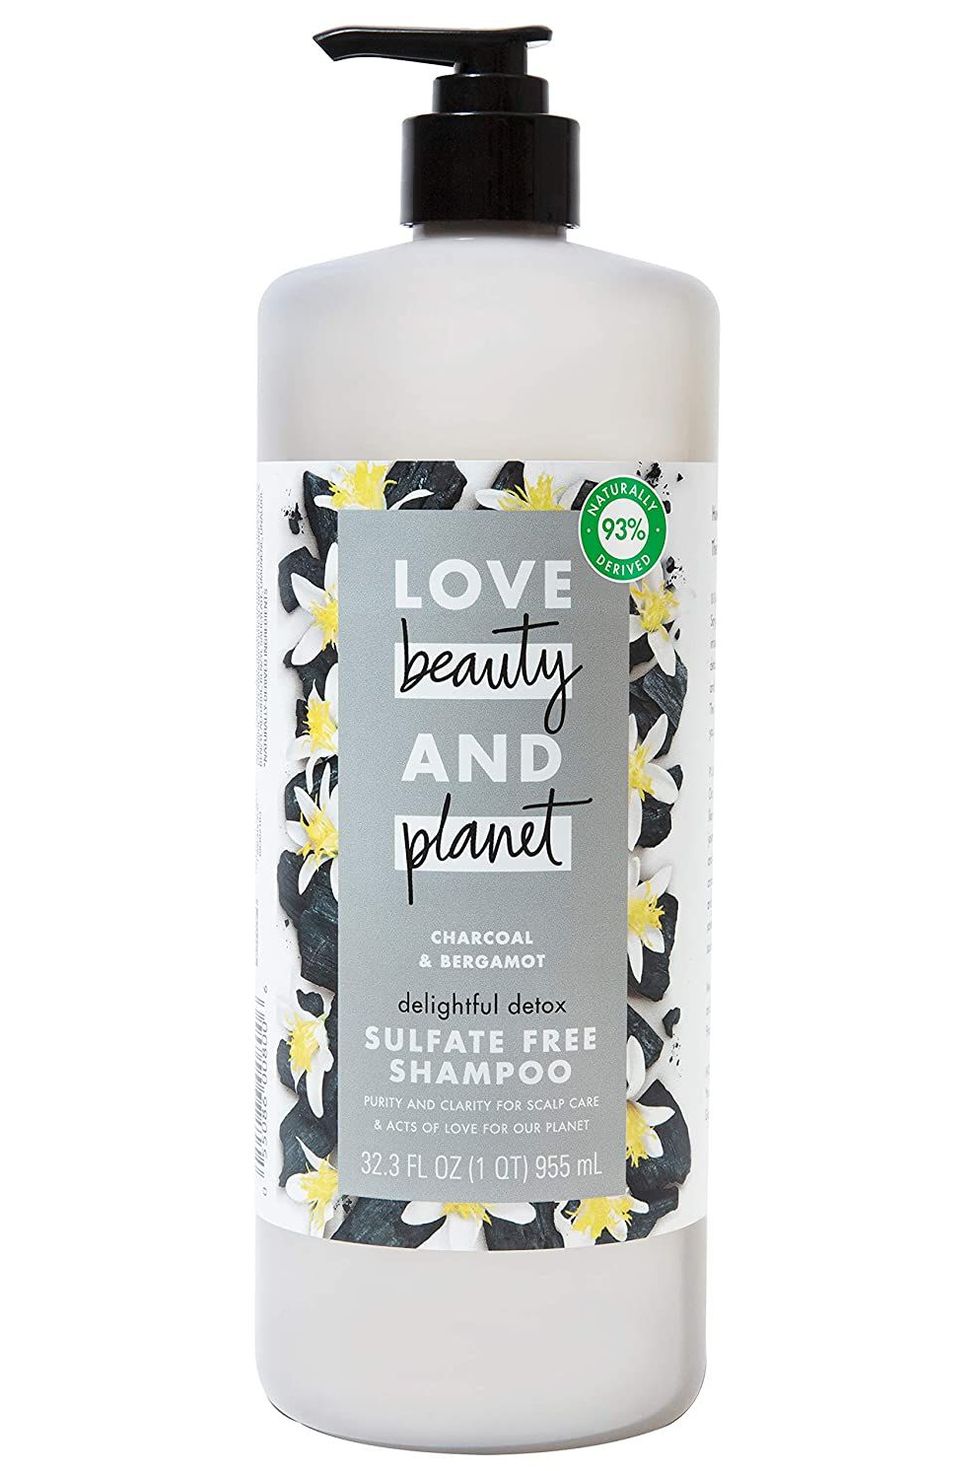 Love Beauty And Planet Delightful Detox Sulfate-Free Shampoo